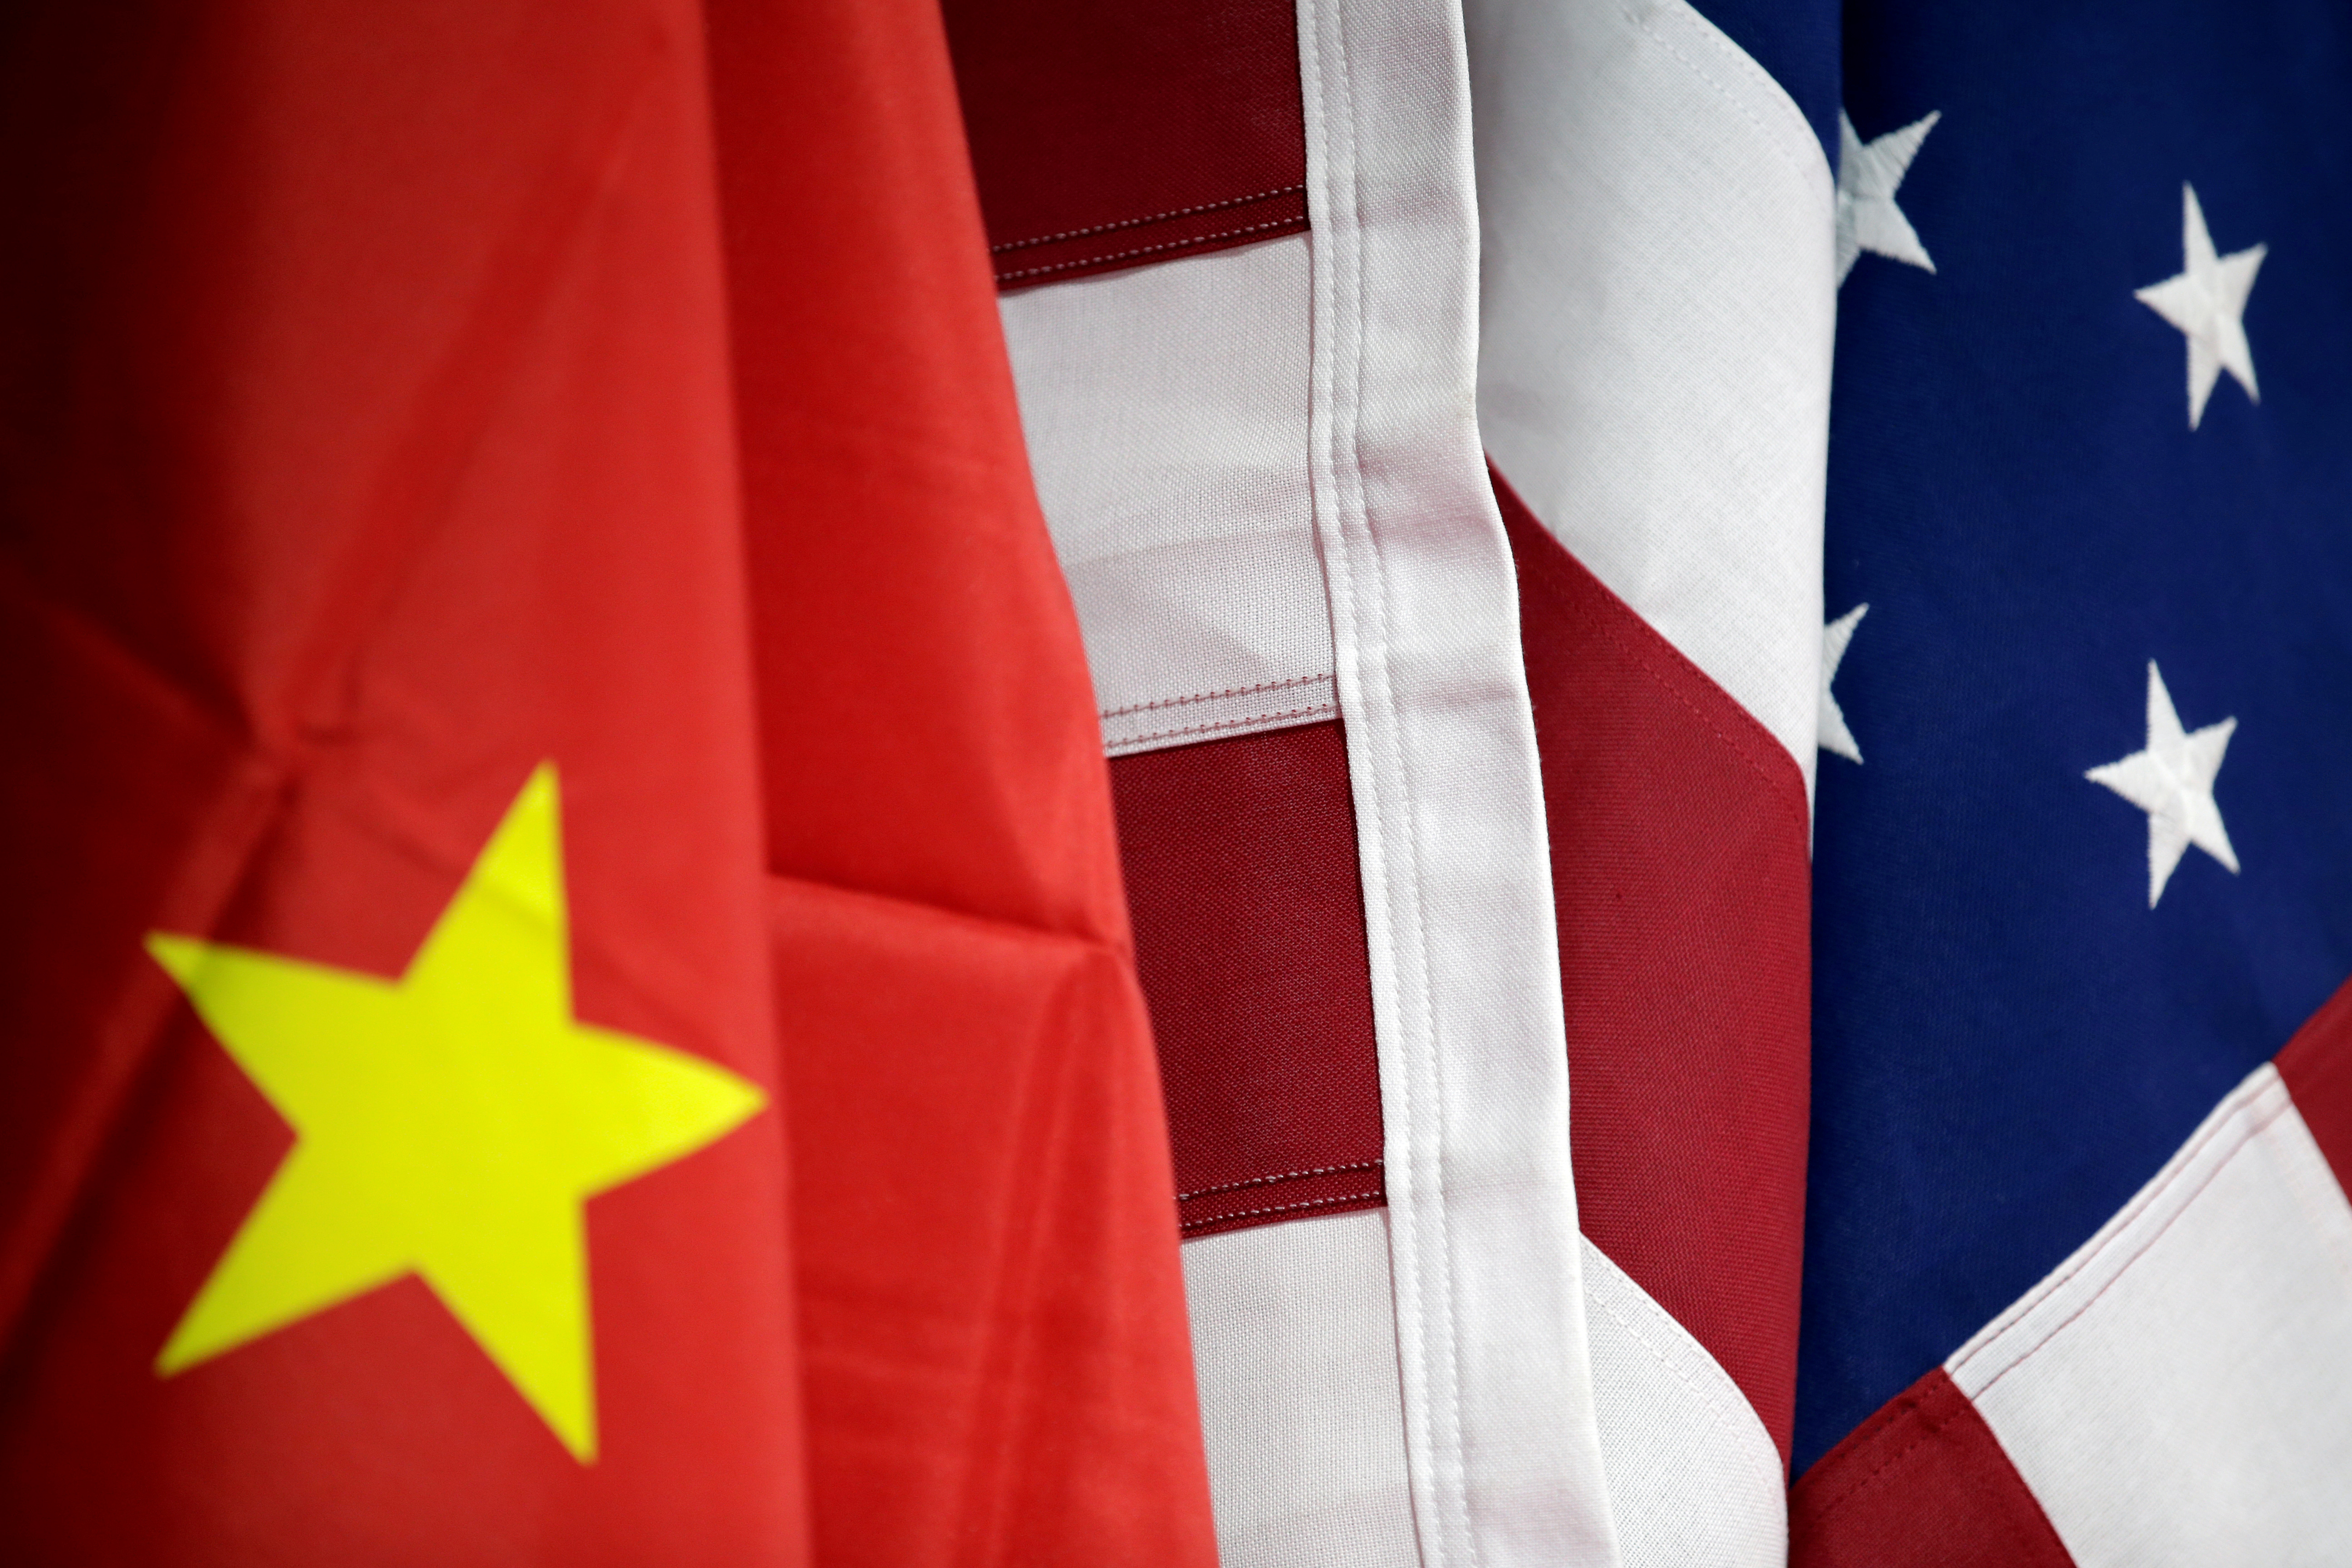 Flags of U.S. and China are displayed at American International Chamber of Commerce (AICC)'s booth during China International Fair for Trade in Services in Beijing, China, May 28, 2019. REUTERS/Jason Lee